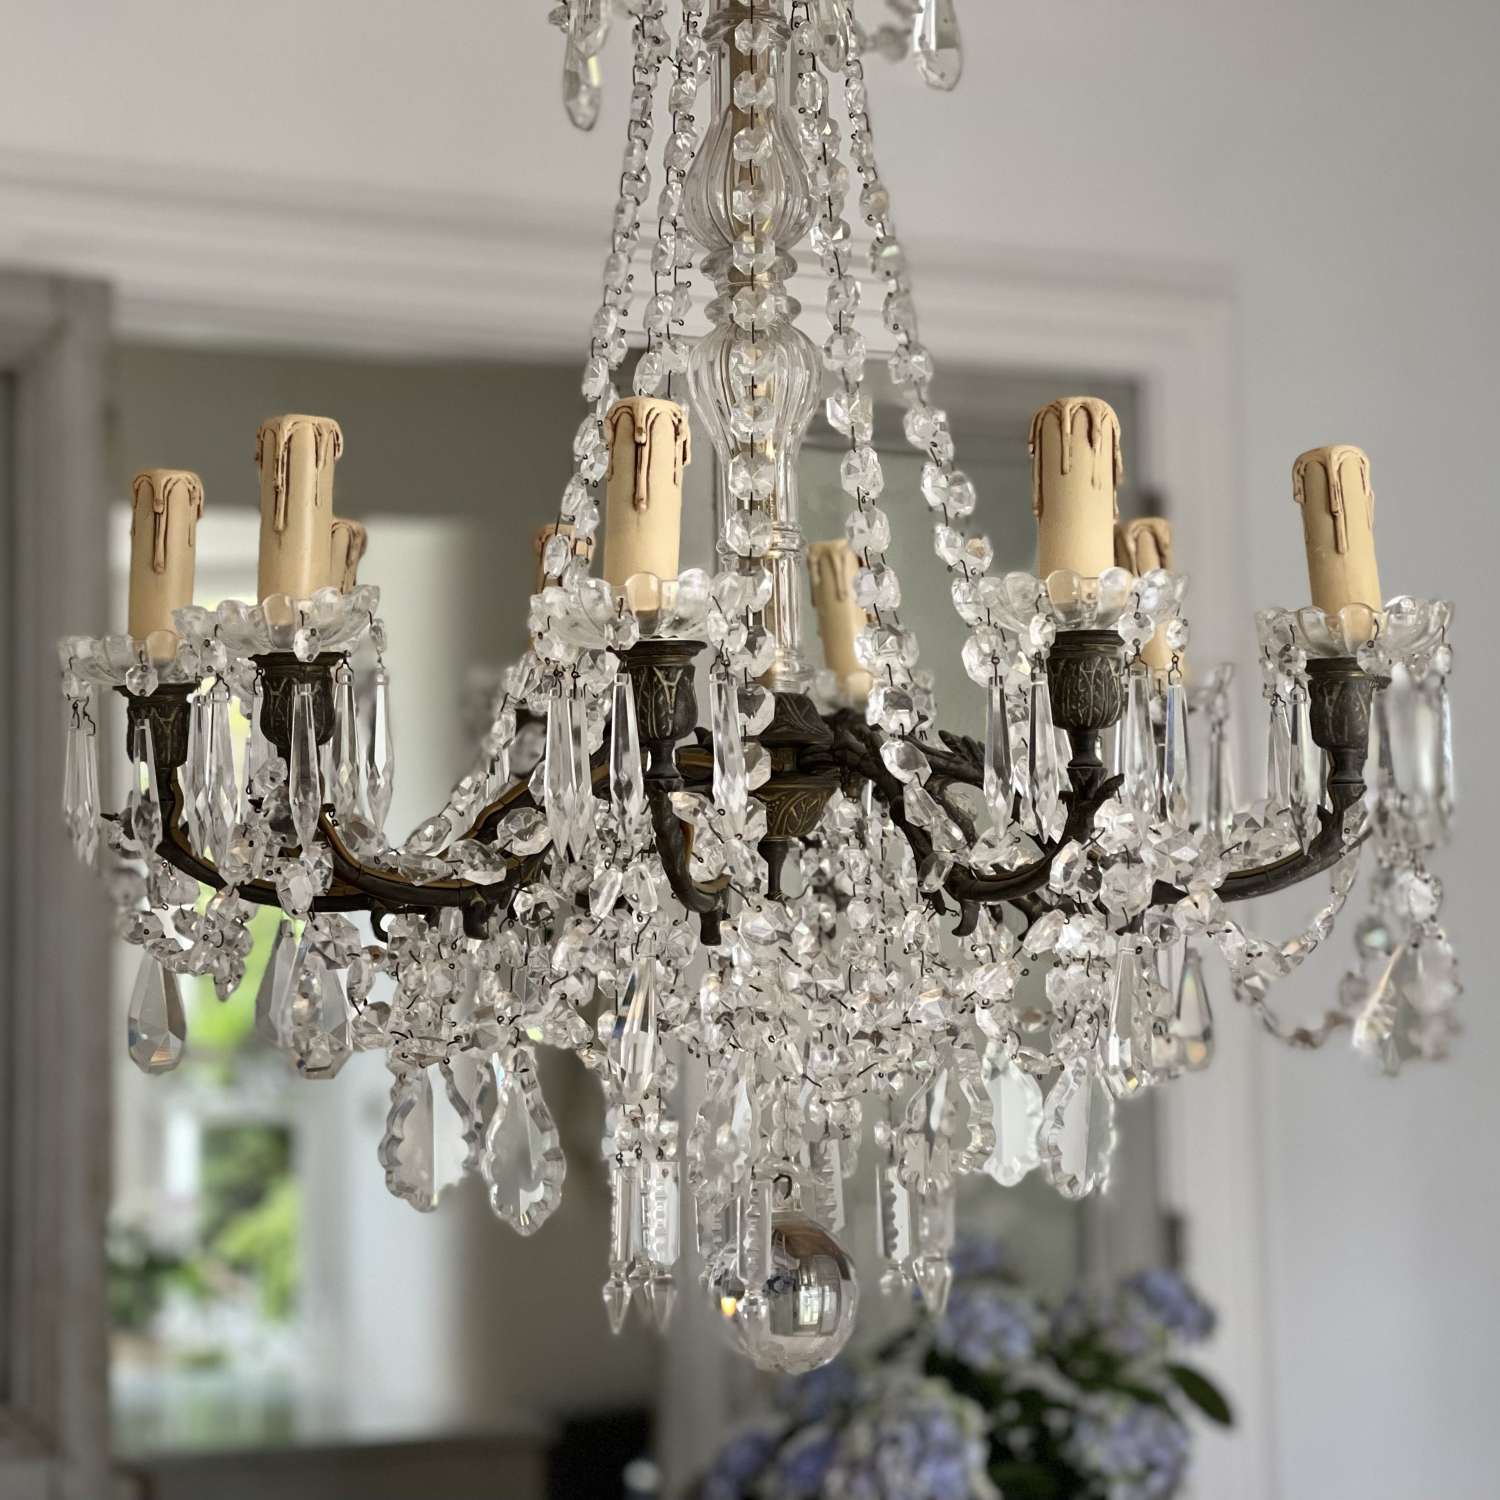 Large 19th century French crystal chandelier